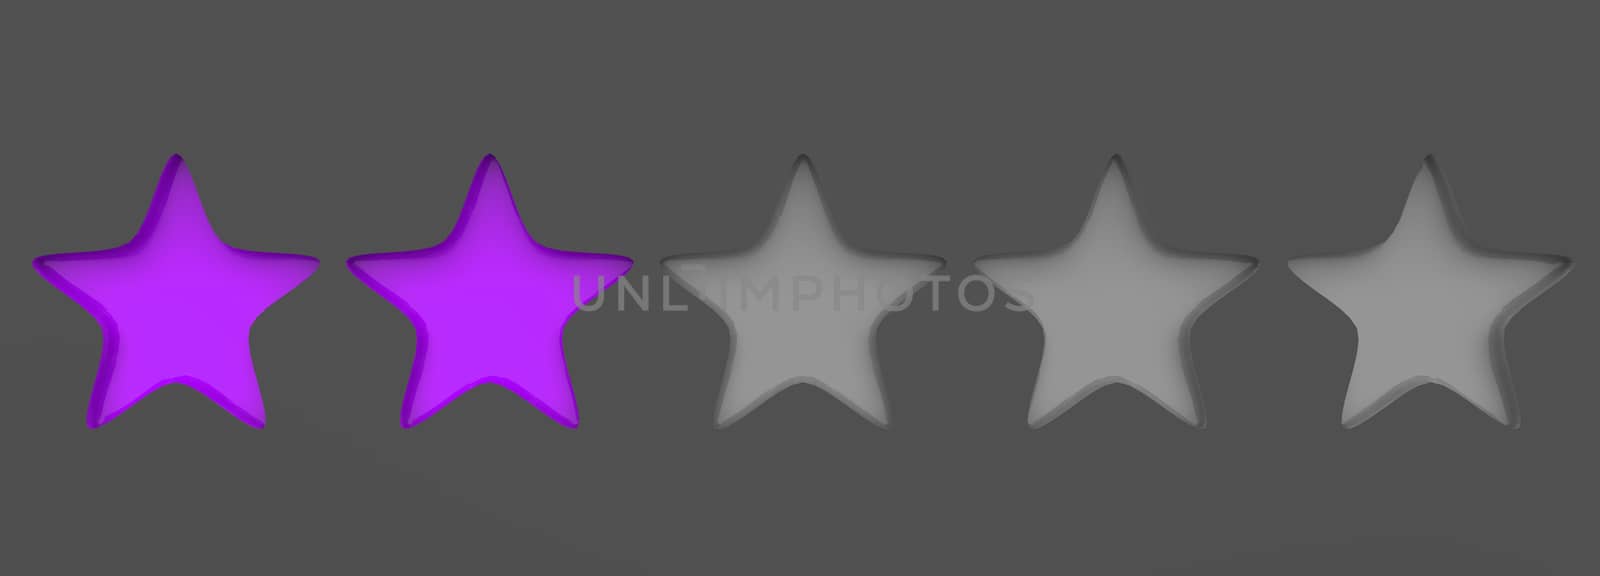 3d violet two star on color background. Render and illustration of golden star for premium review by Andreajk3